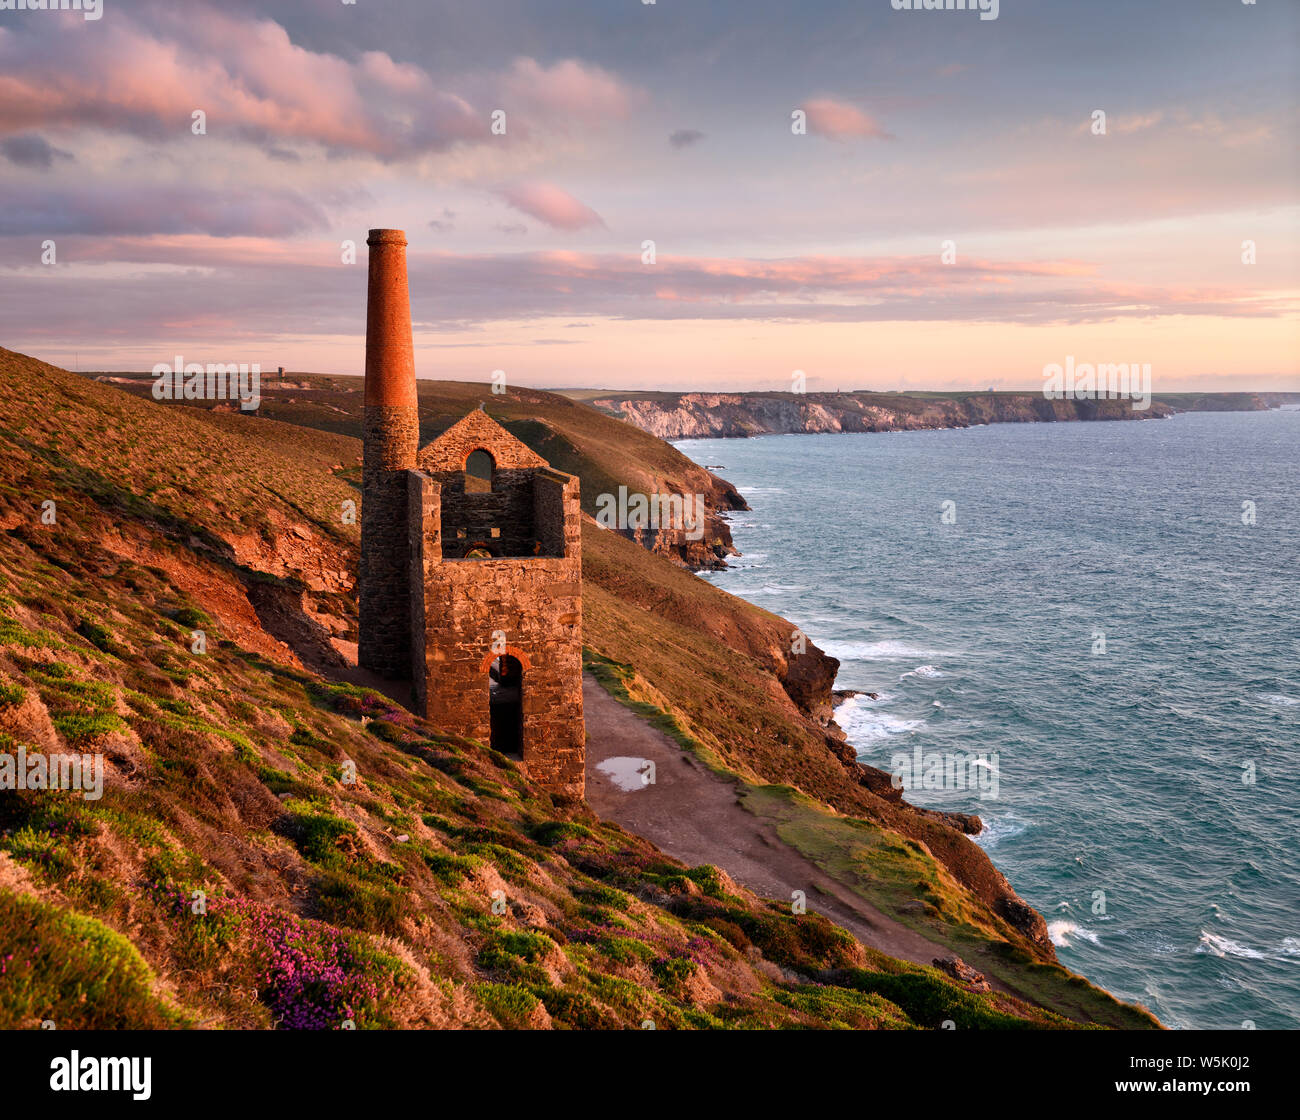 Towanroath Shaft Pumping Engine House ruins at Wheal Coates tine mine on the cliffs of Celtic Sea Cornwall England with Great Wheal Charlotte Stock Photo